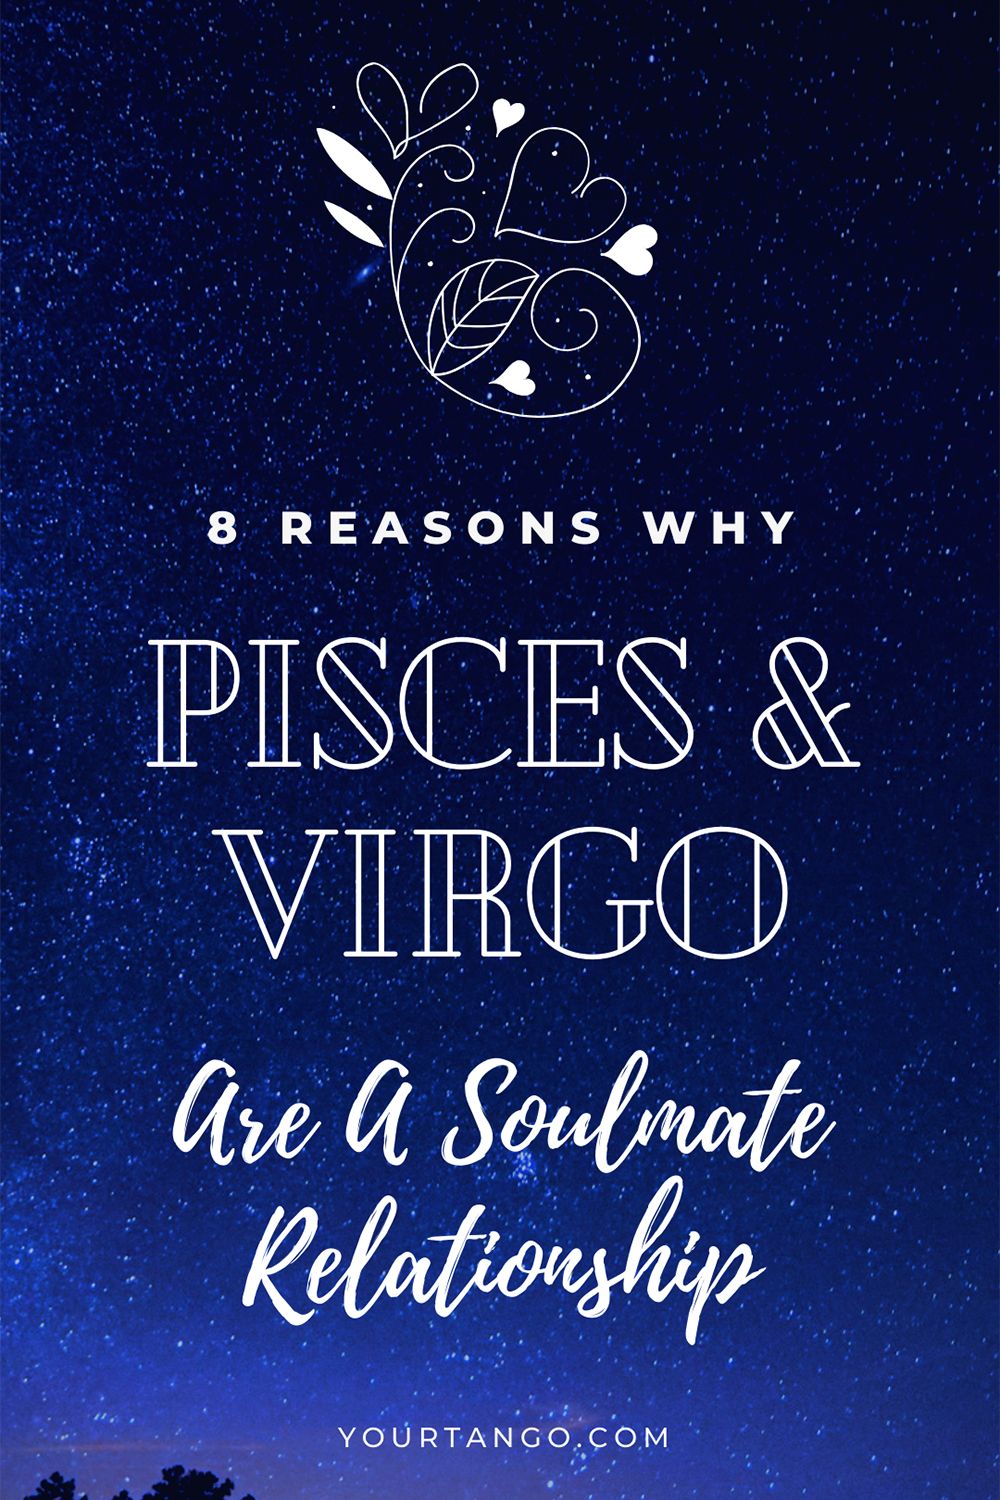 8 Reasons Why Pisces & Virgo Are A Soulmate Relationship